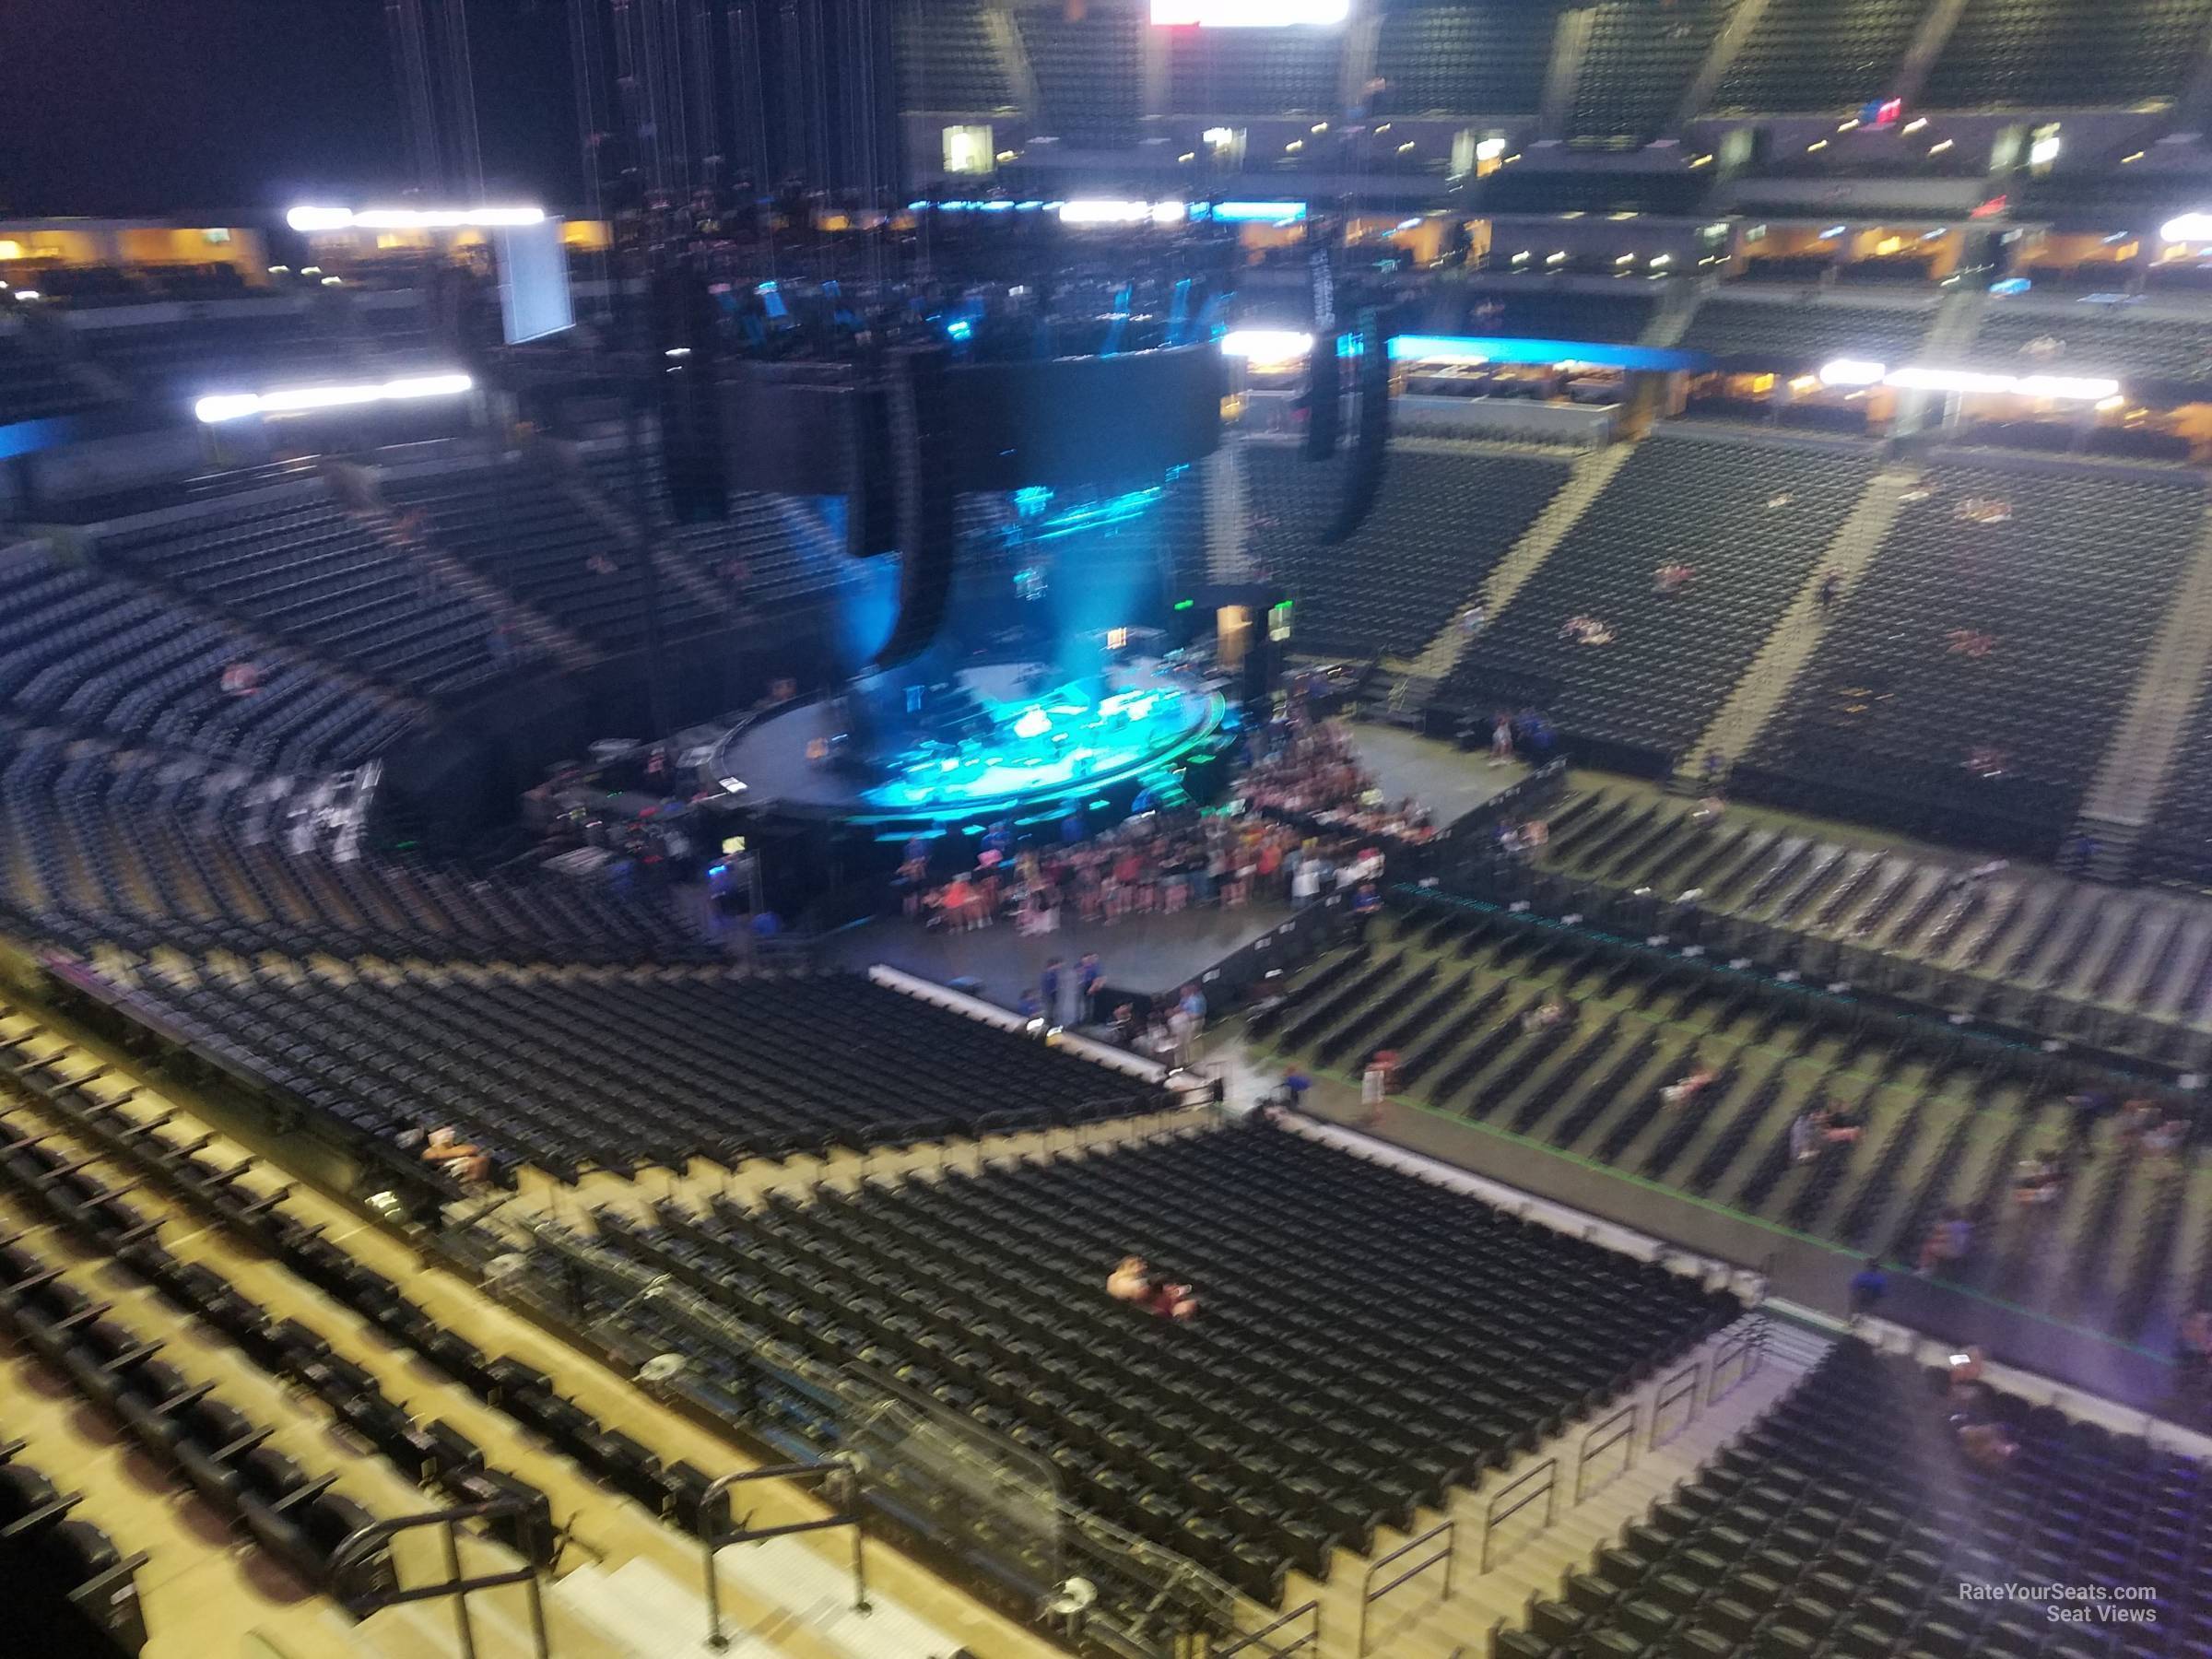 section 341, row 3 seat view  for concert - ball arena